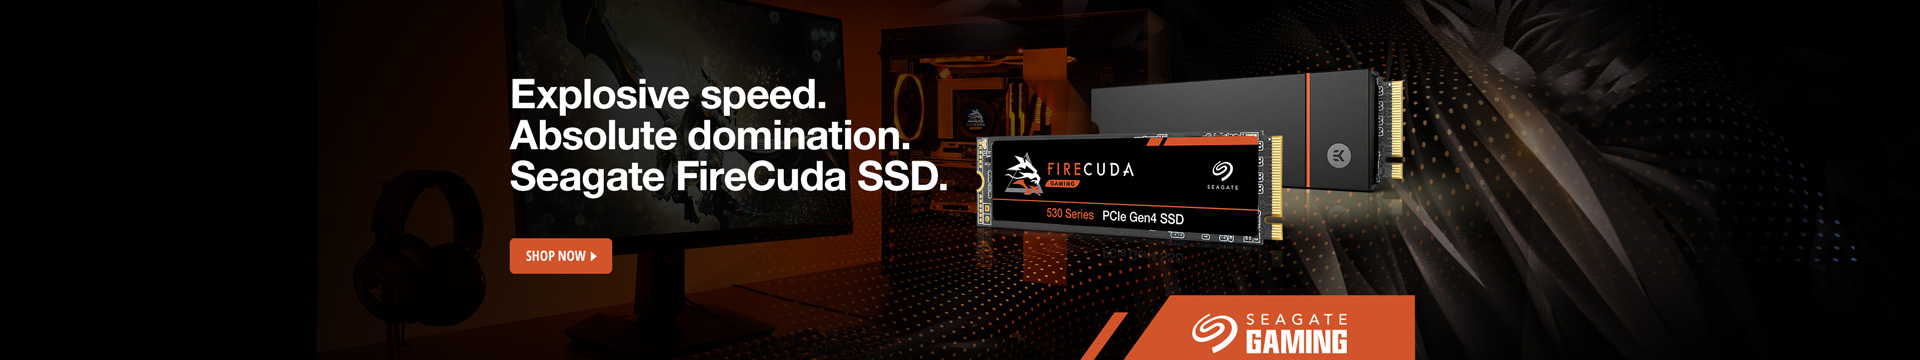 Explosive speed. Absolute domination. Seagate FireCuda SSD.